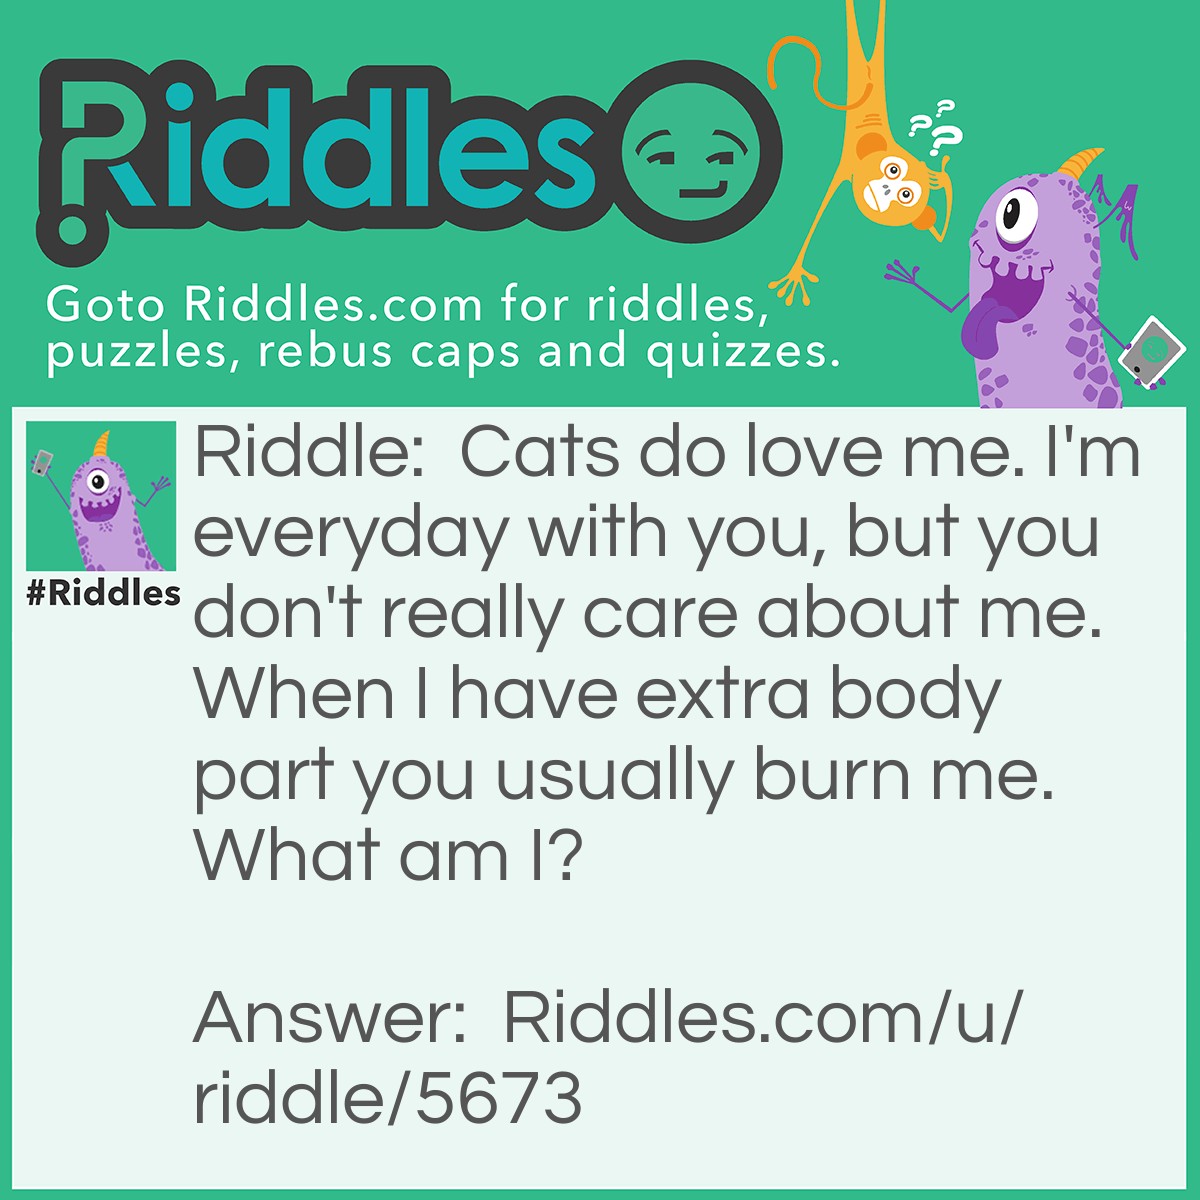 Riddle: Cats do love me. I'm everyday with you, but you don't really care about me. When I have extra body part you usually burn me. What am I? Answer: The yarn.